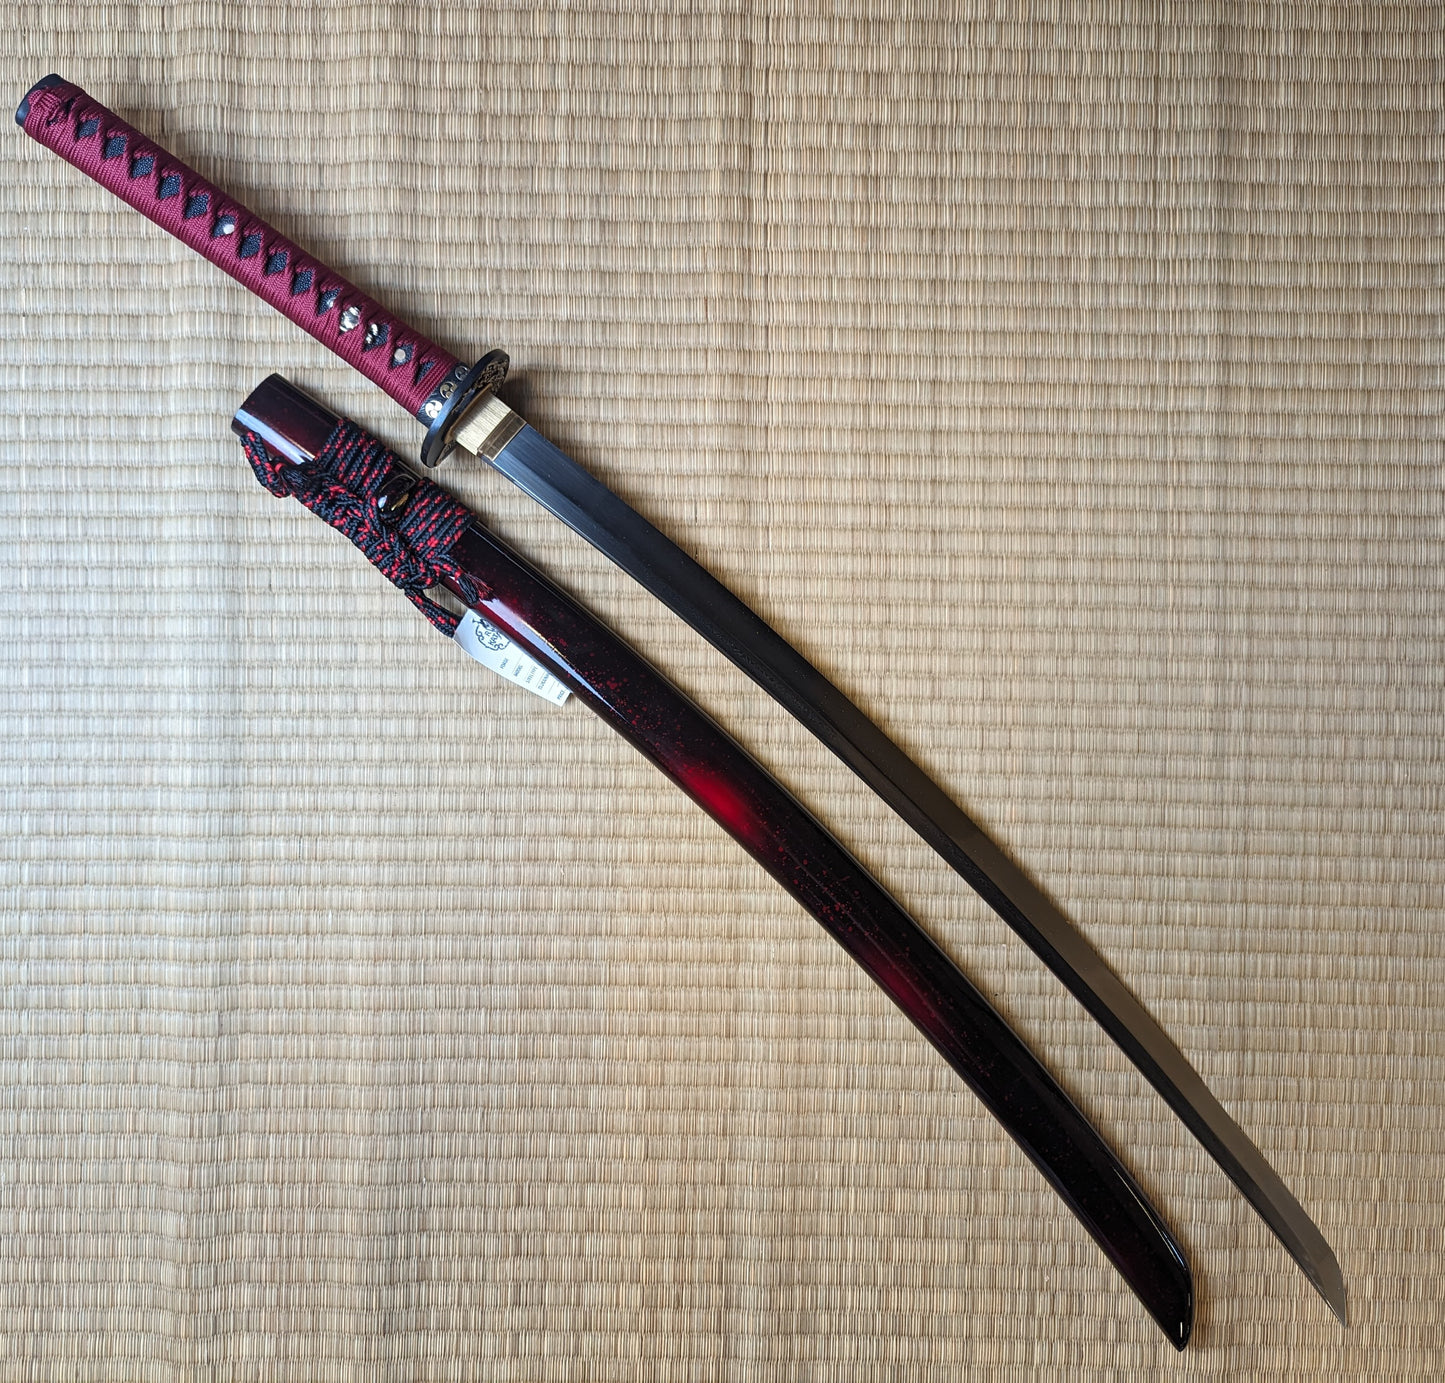 Katana - Blood Tiger - Deep Curve, Folded Steel, Clay Tempered, Brass Fittings